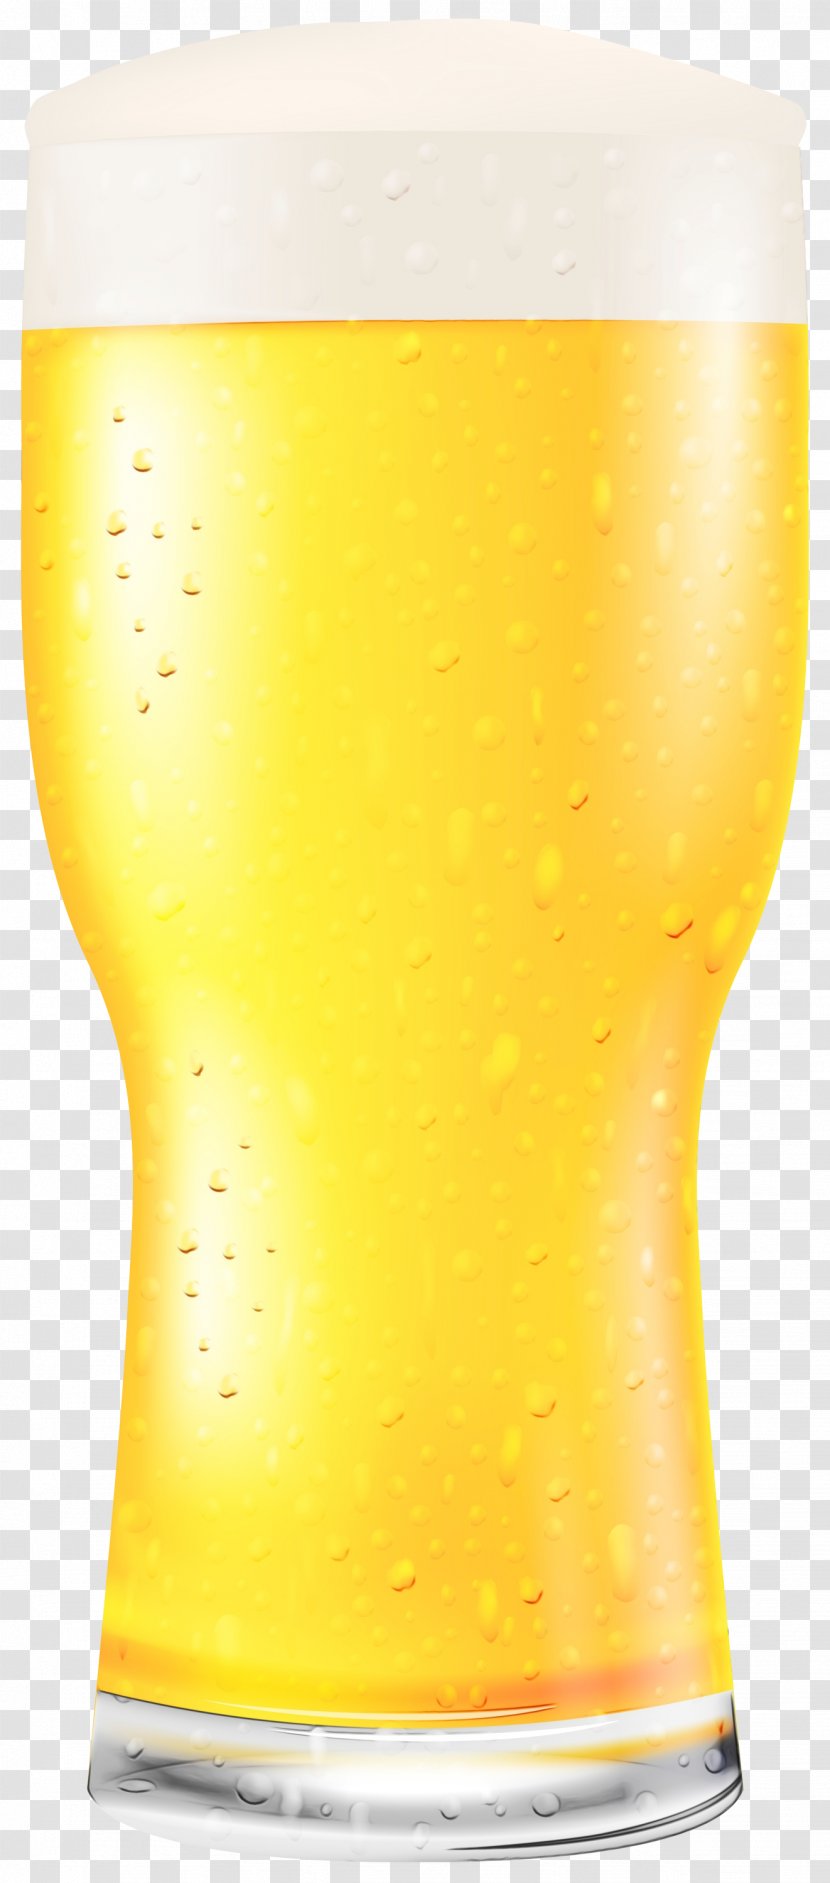 Watercolor Background - Wheat Beer - Drinkware Glass Transparent PNG